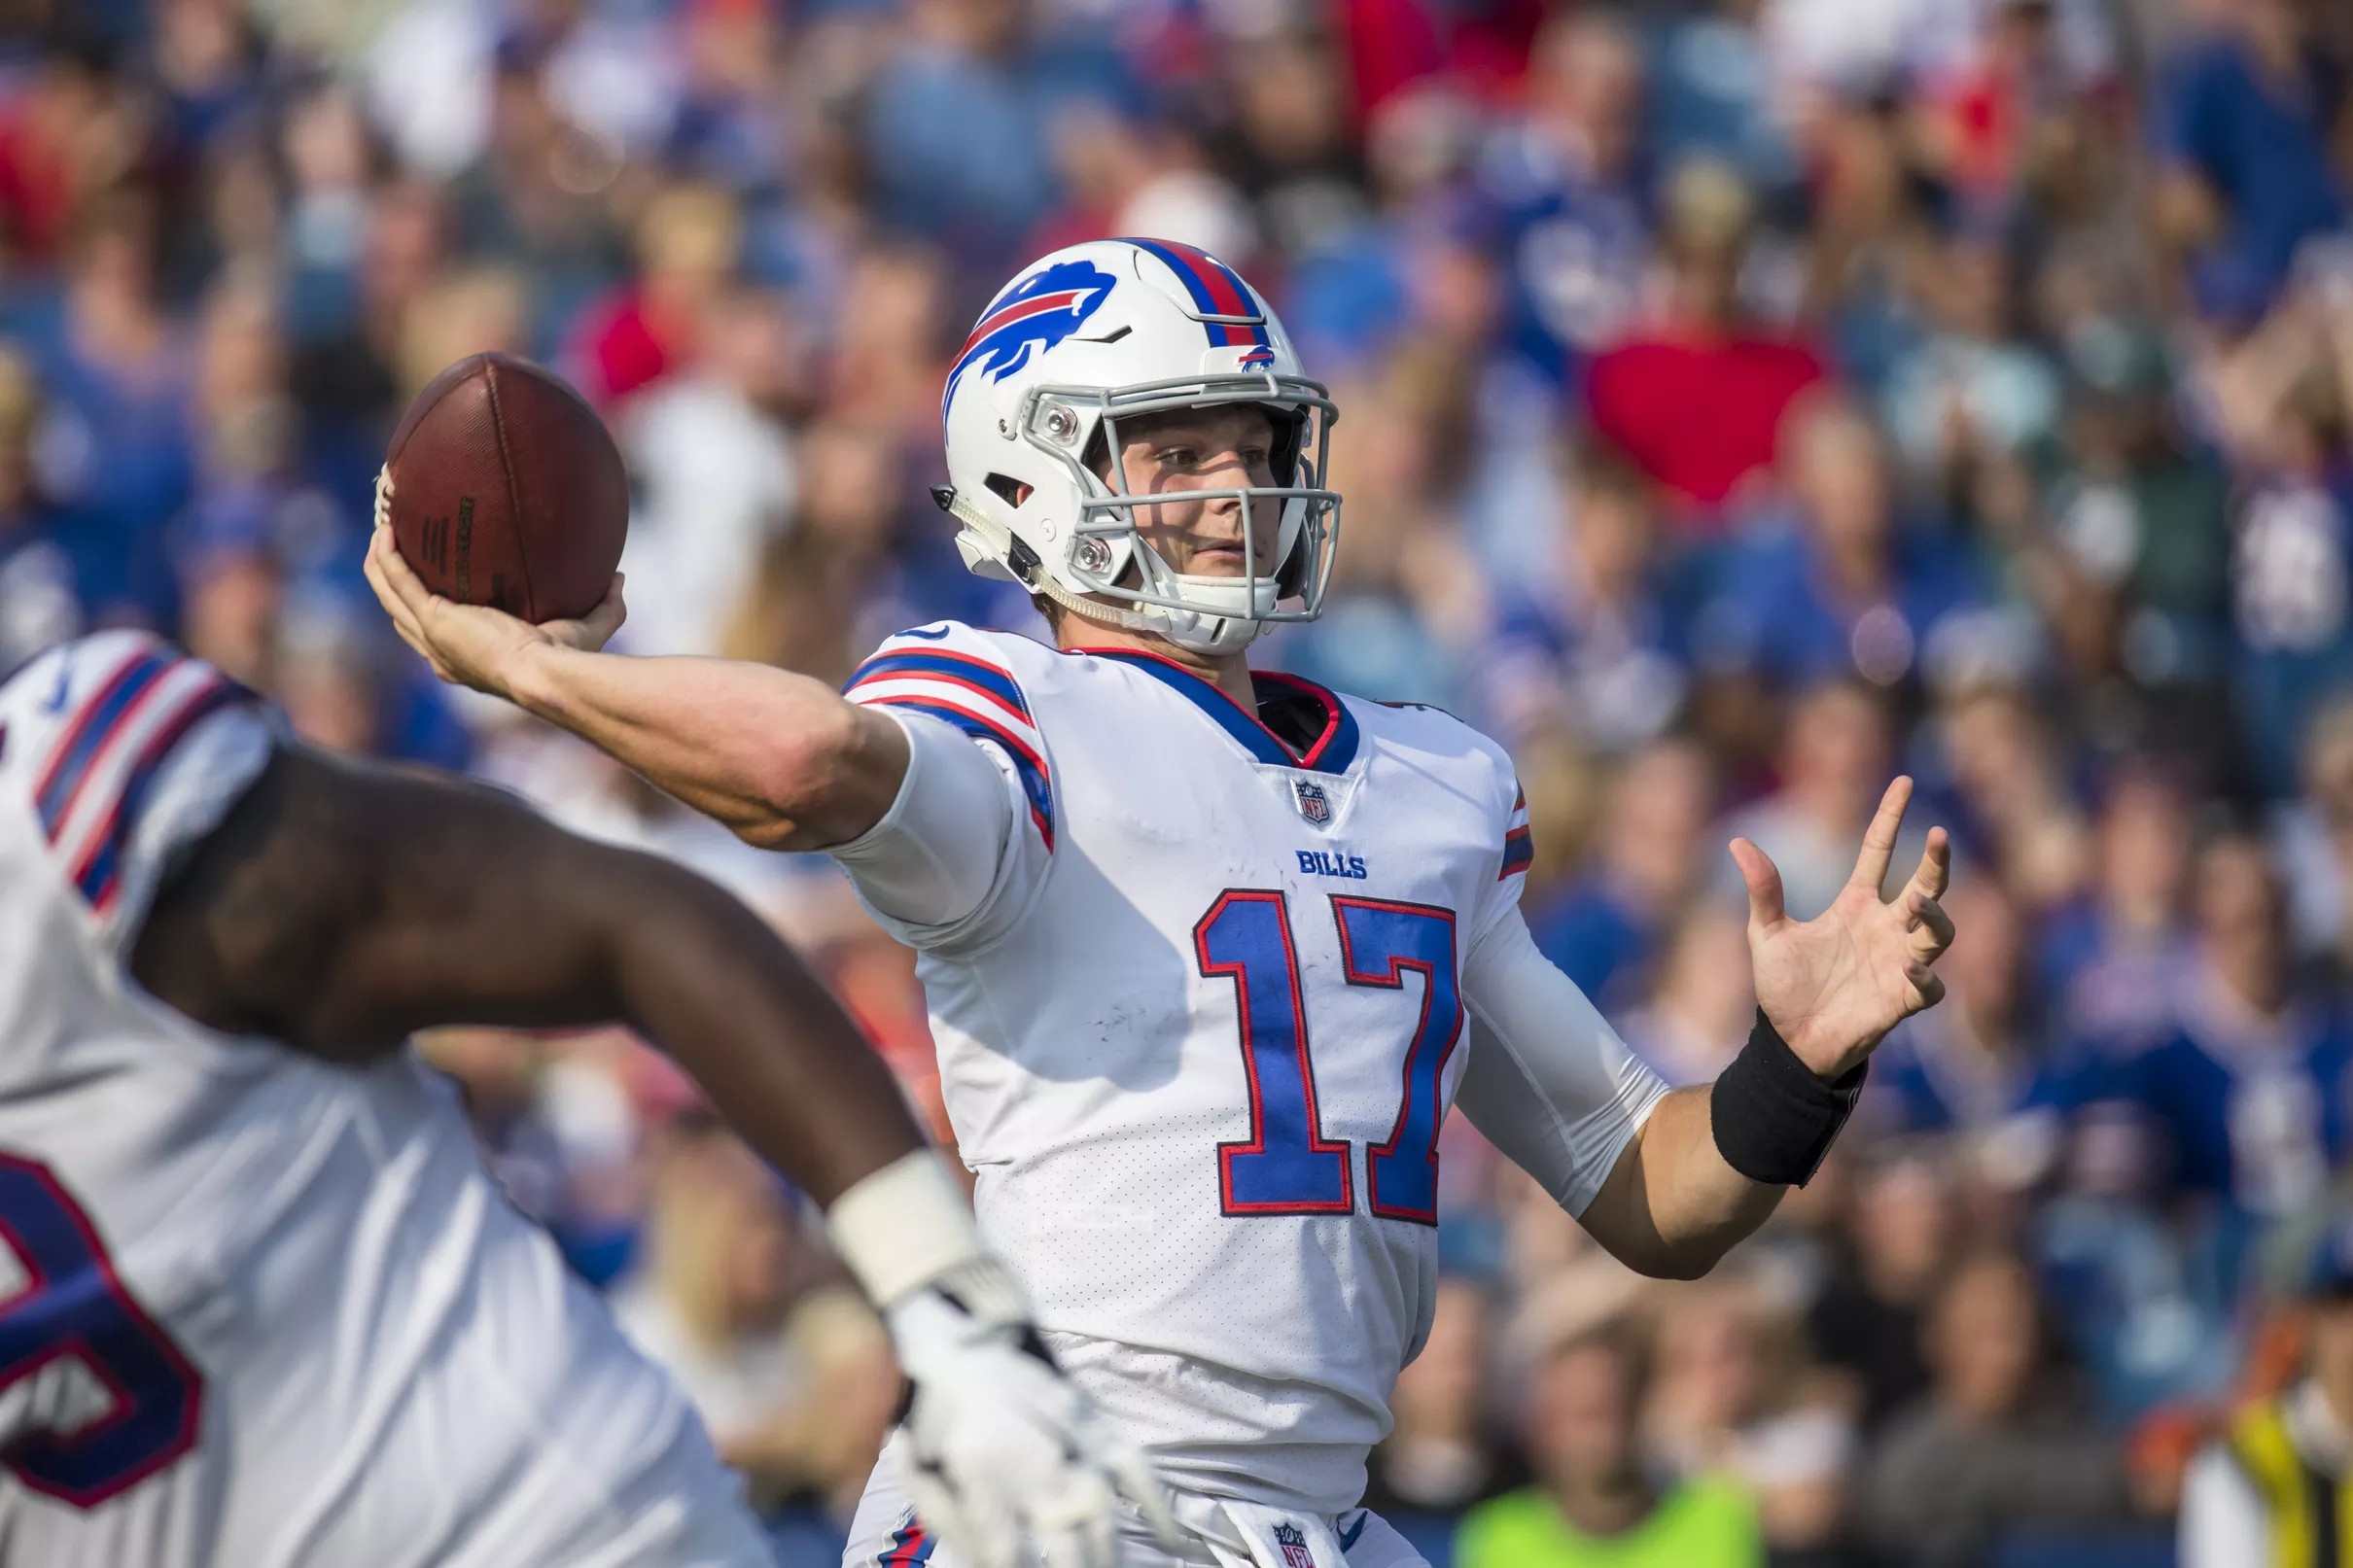 Five questions with Buffalo Rumblings about the Bills